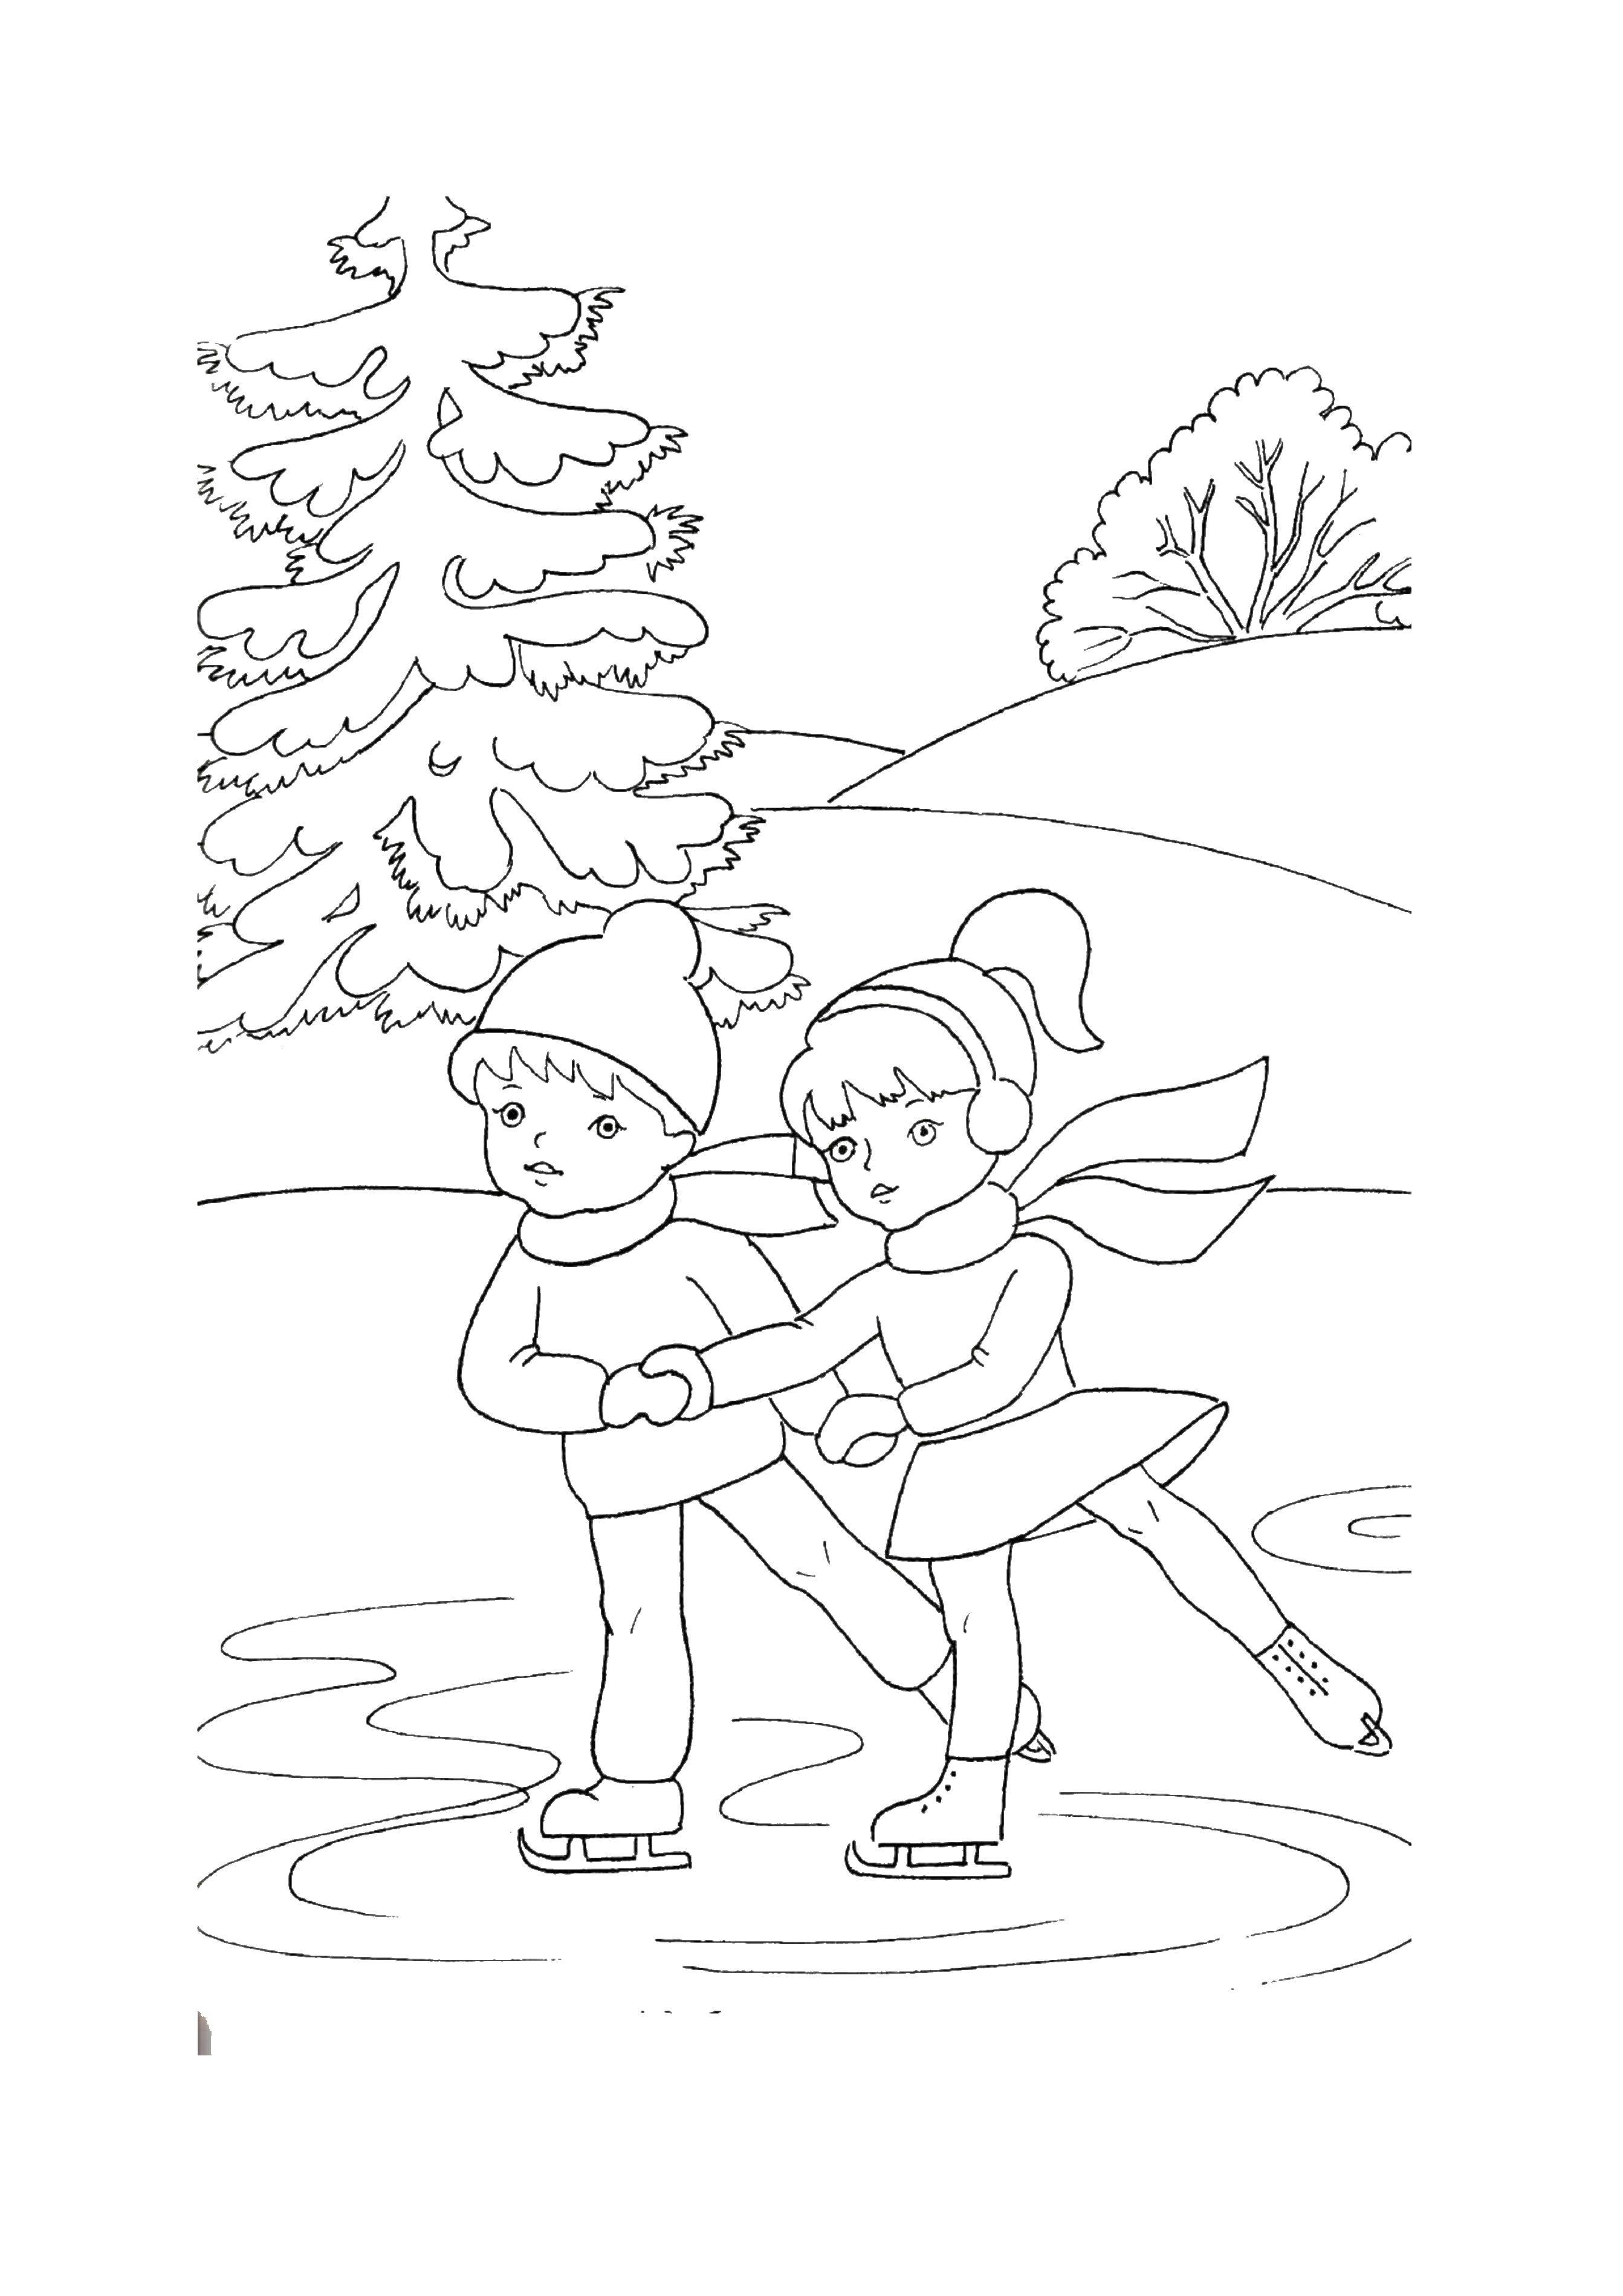 Coloring Boy and girl on ice. Category winter. Tags:  skating rink, boy, girl.